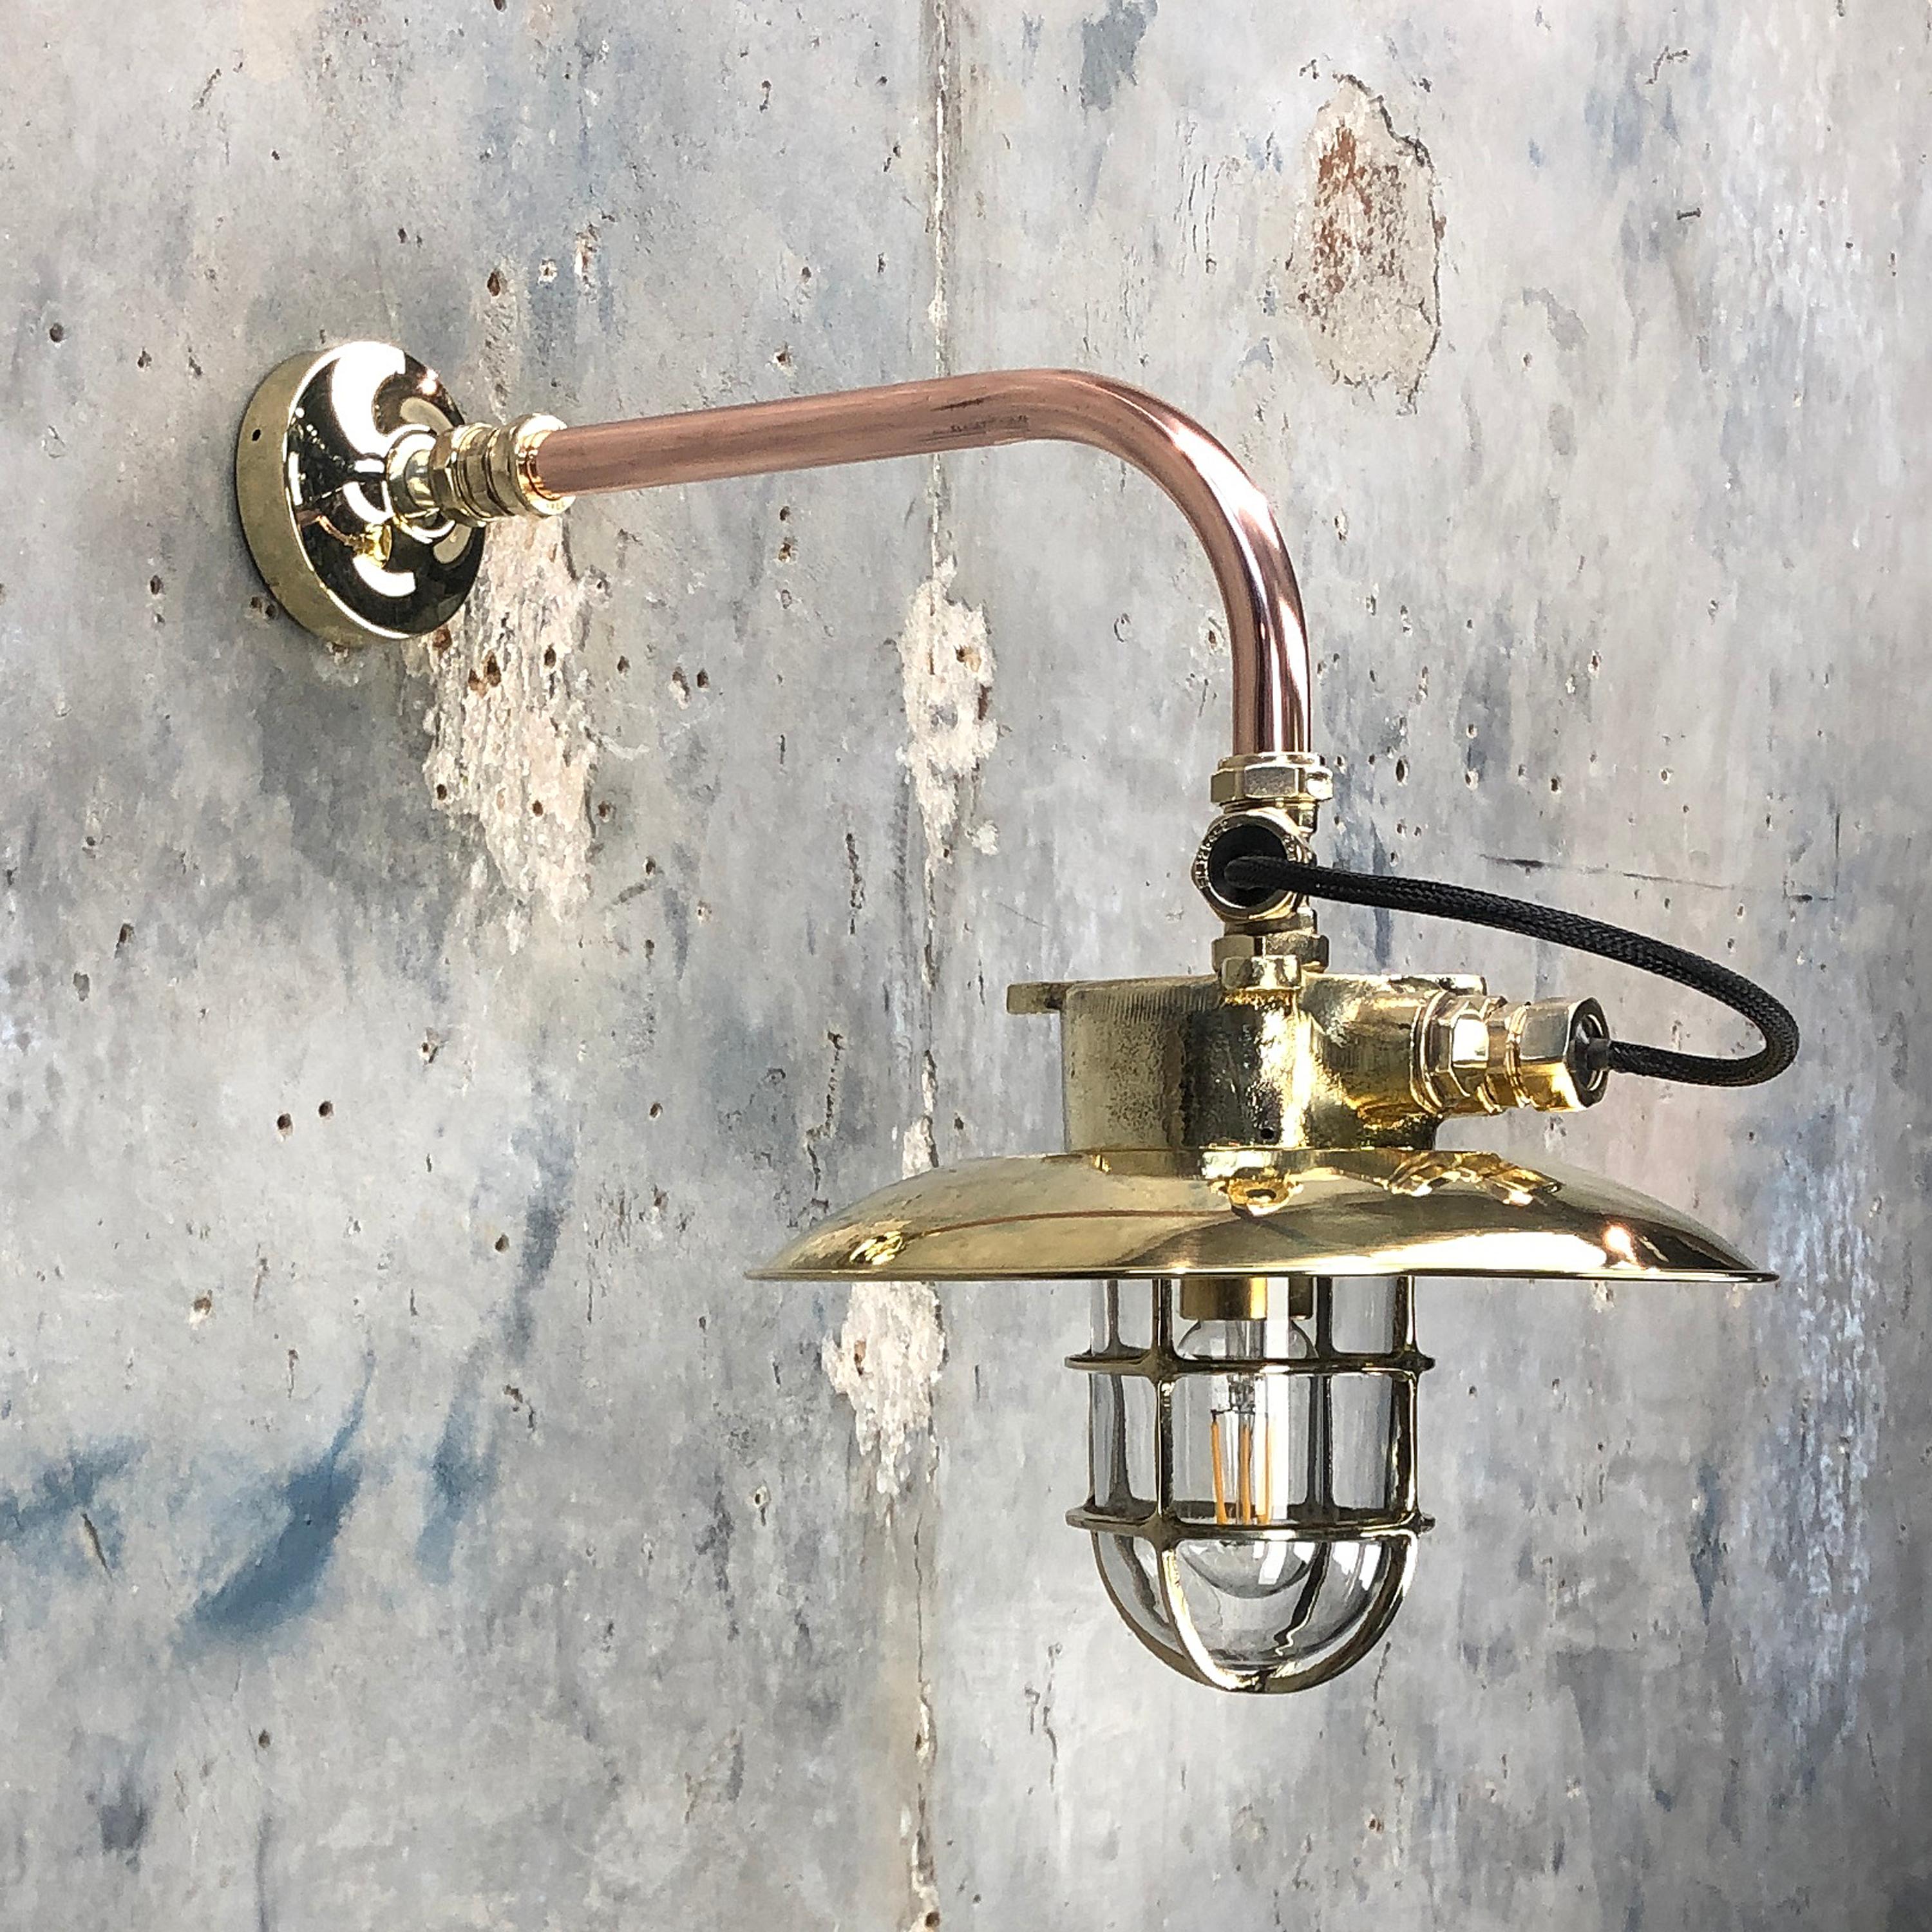 1970s Japanese Cast Brass and Copper Explosion Proof Caged Cantilever Wall Light 6